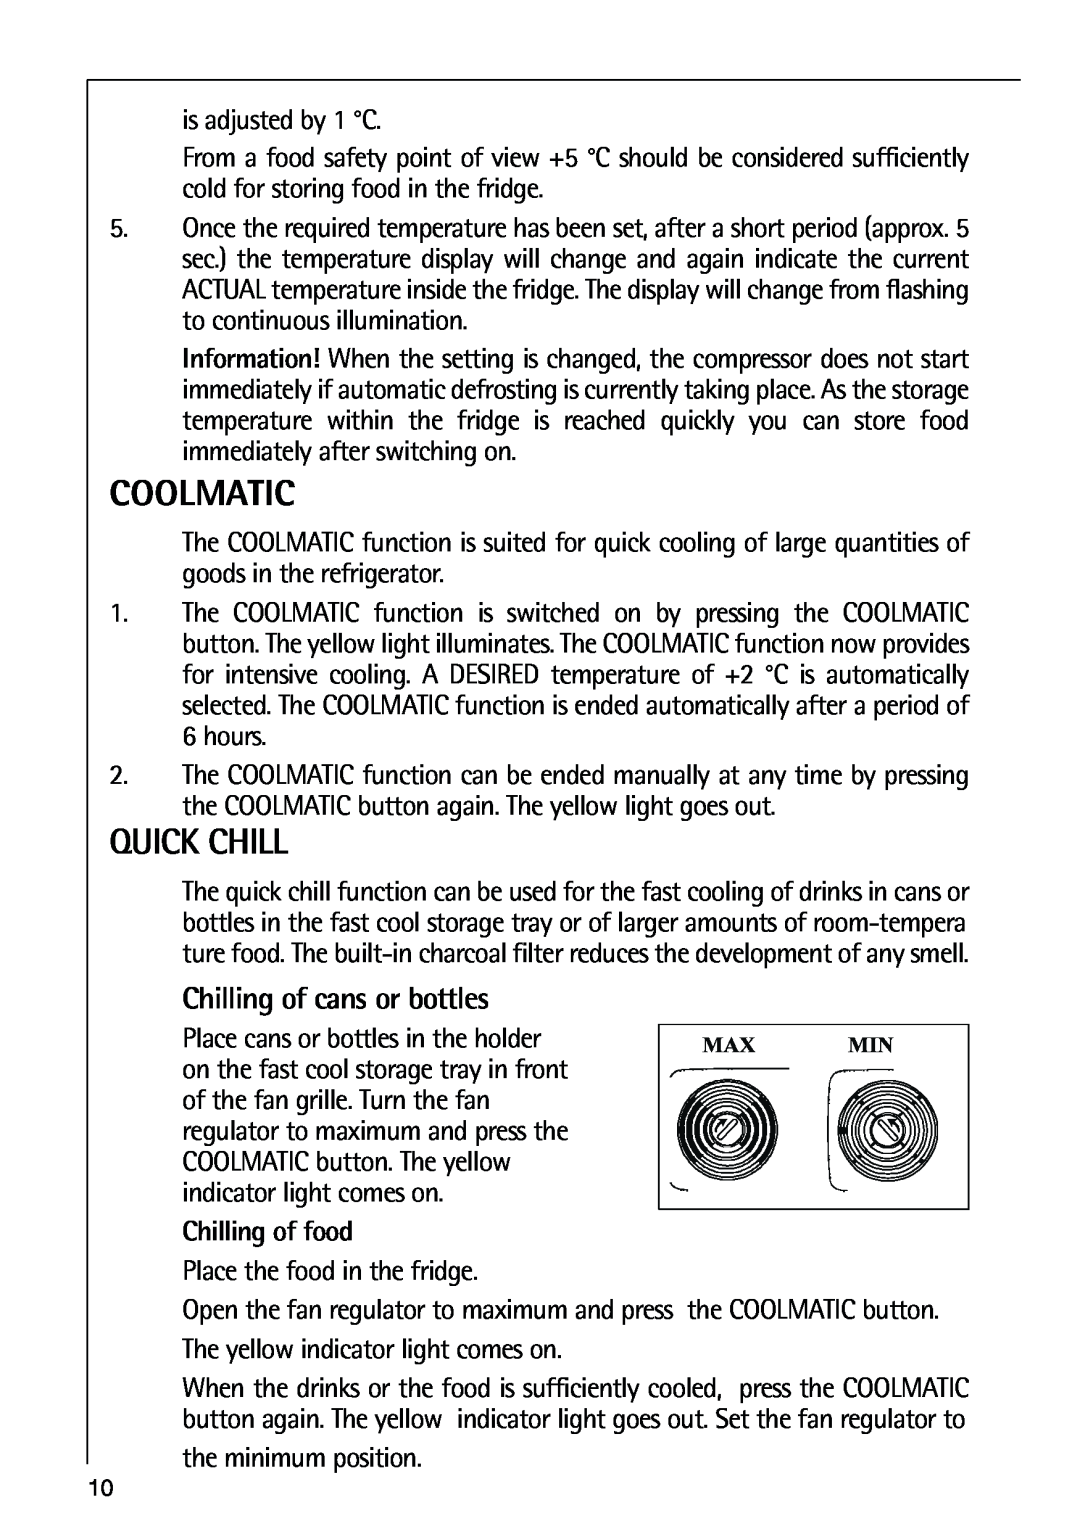 Electrolux 72398 KA user manual Coolmatic, Quick Chill, Chilling of cans or bottles, Chilling of food 